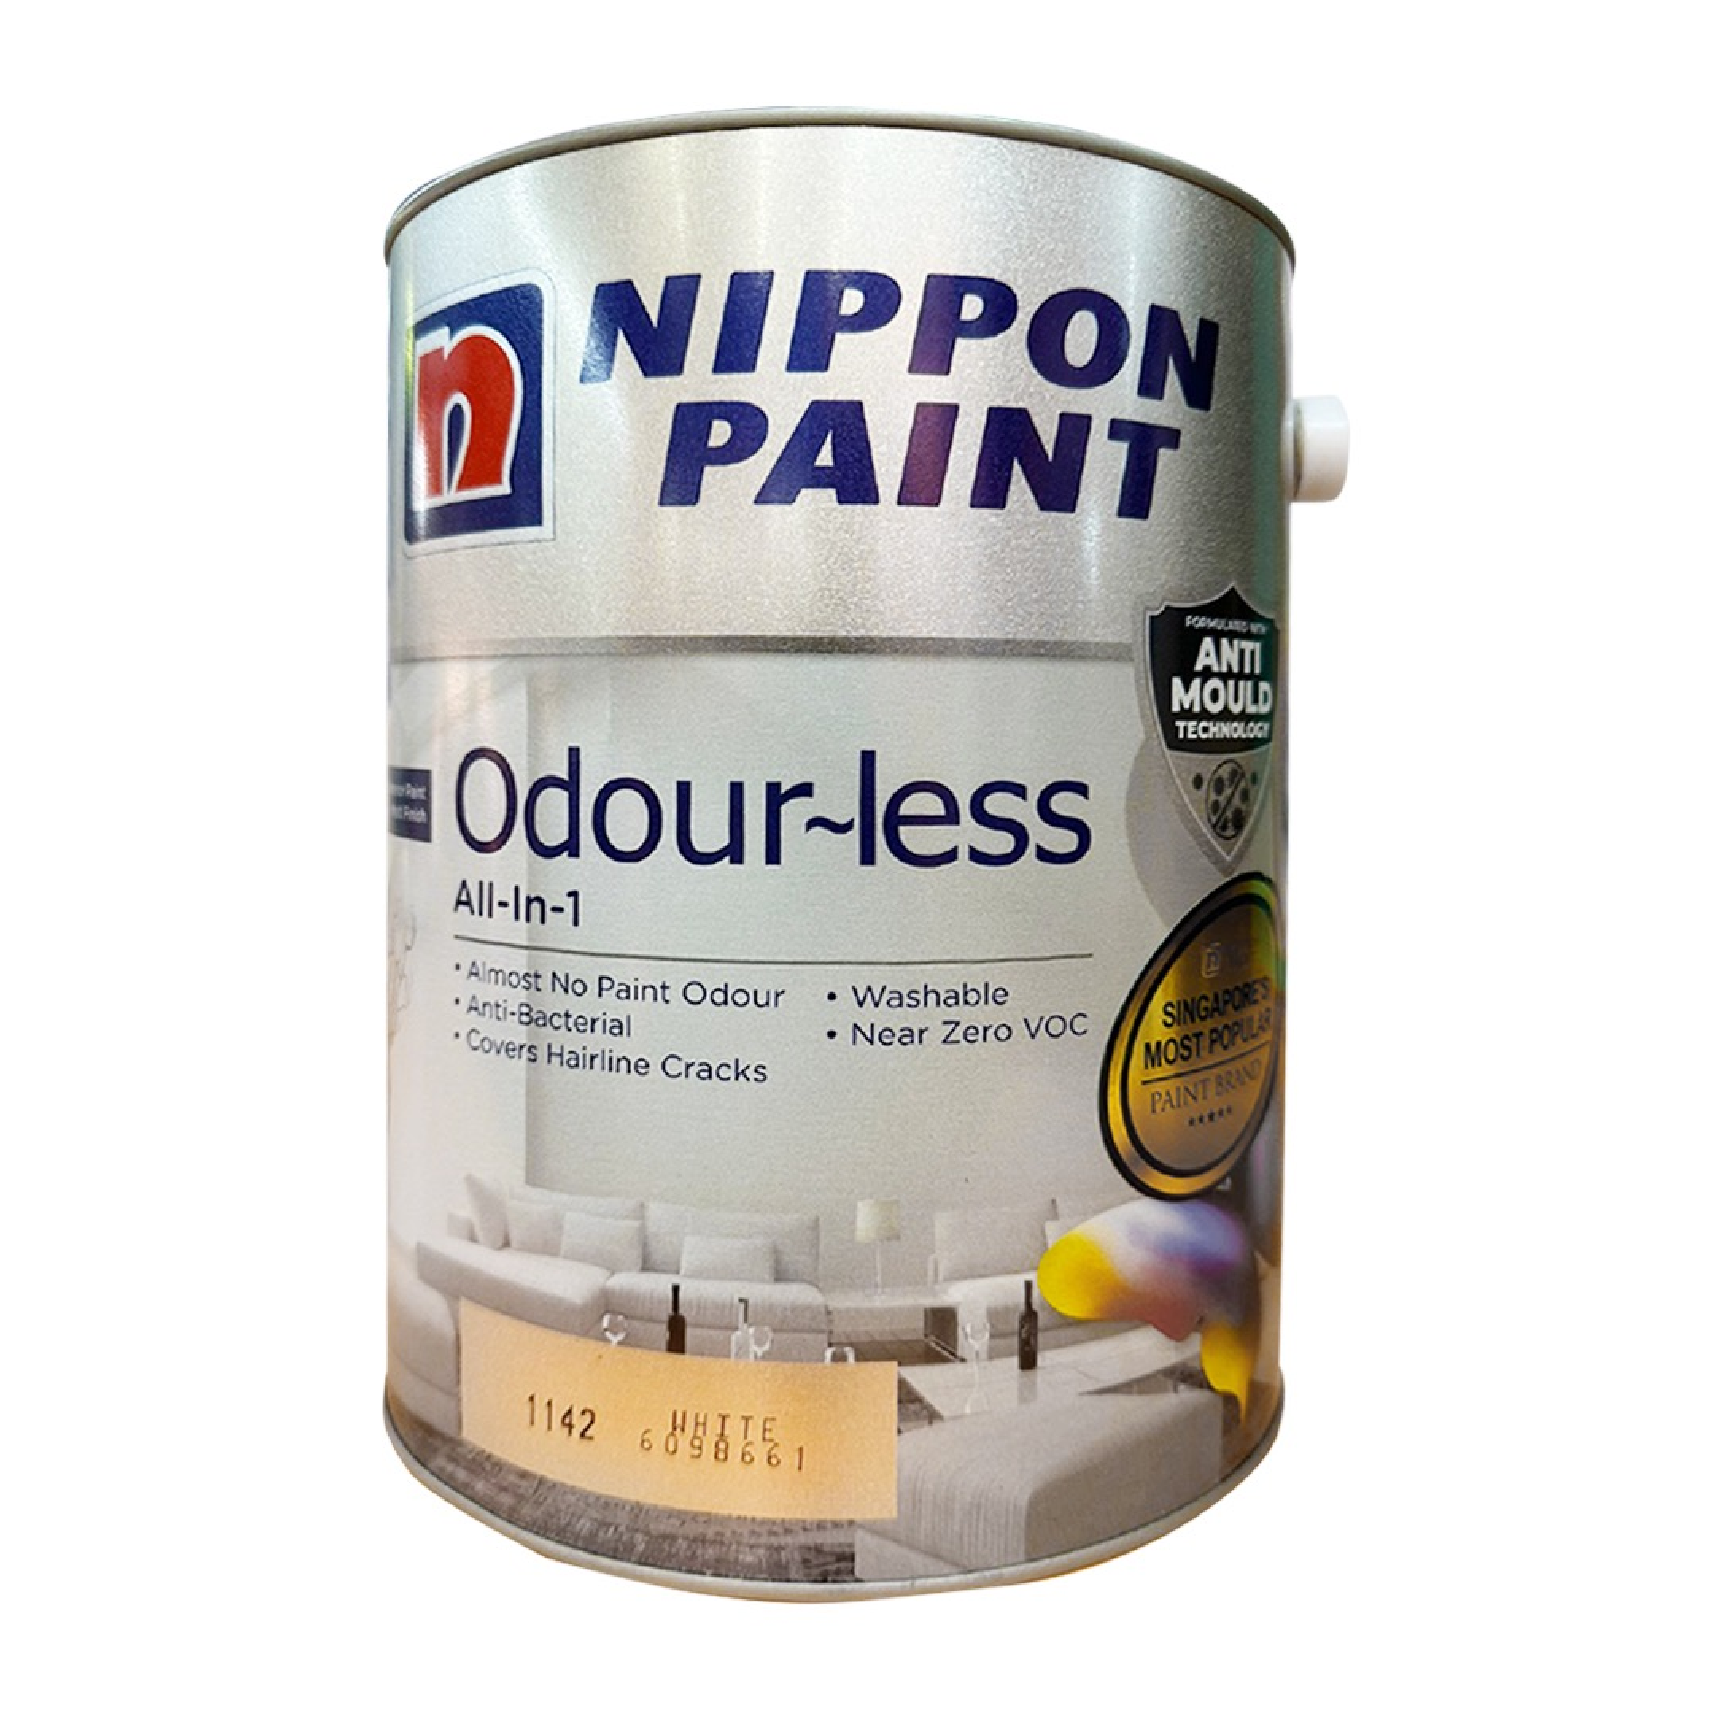 Nippon Paint Odour-less All-IN-1 5L